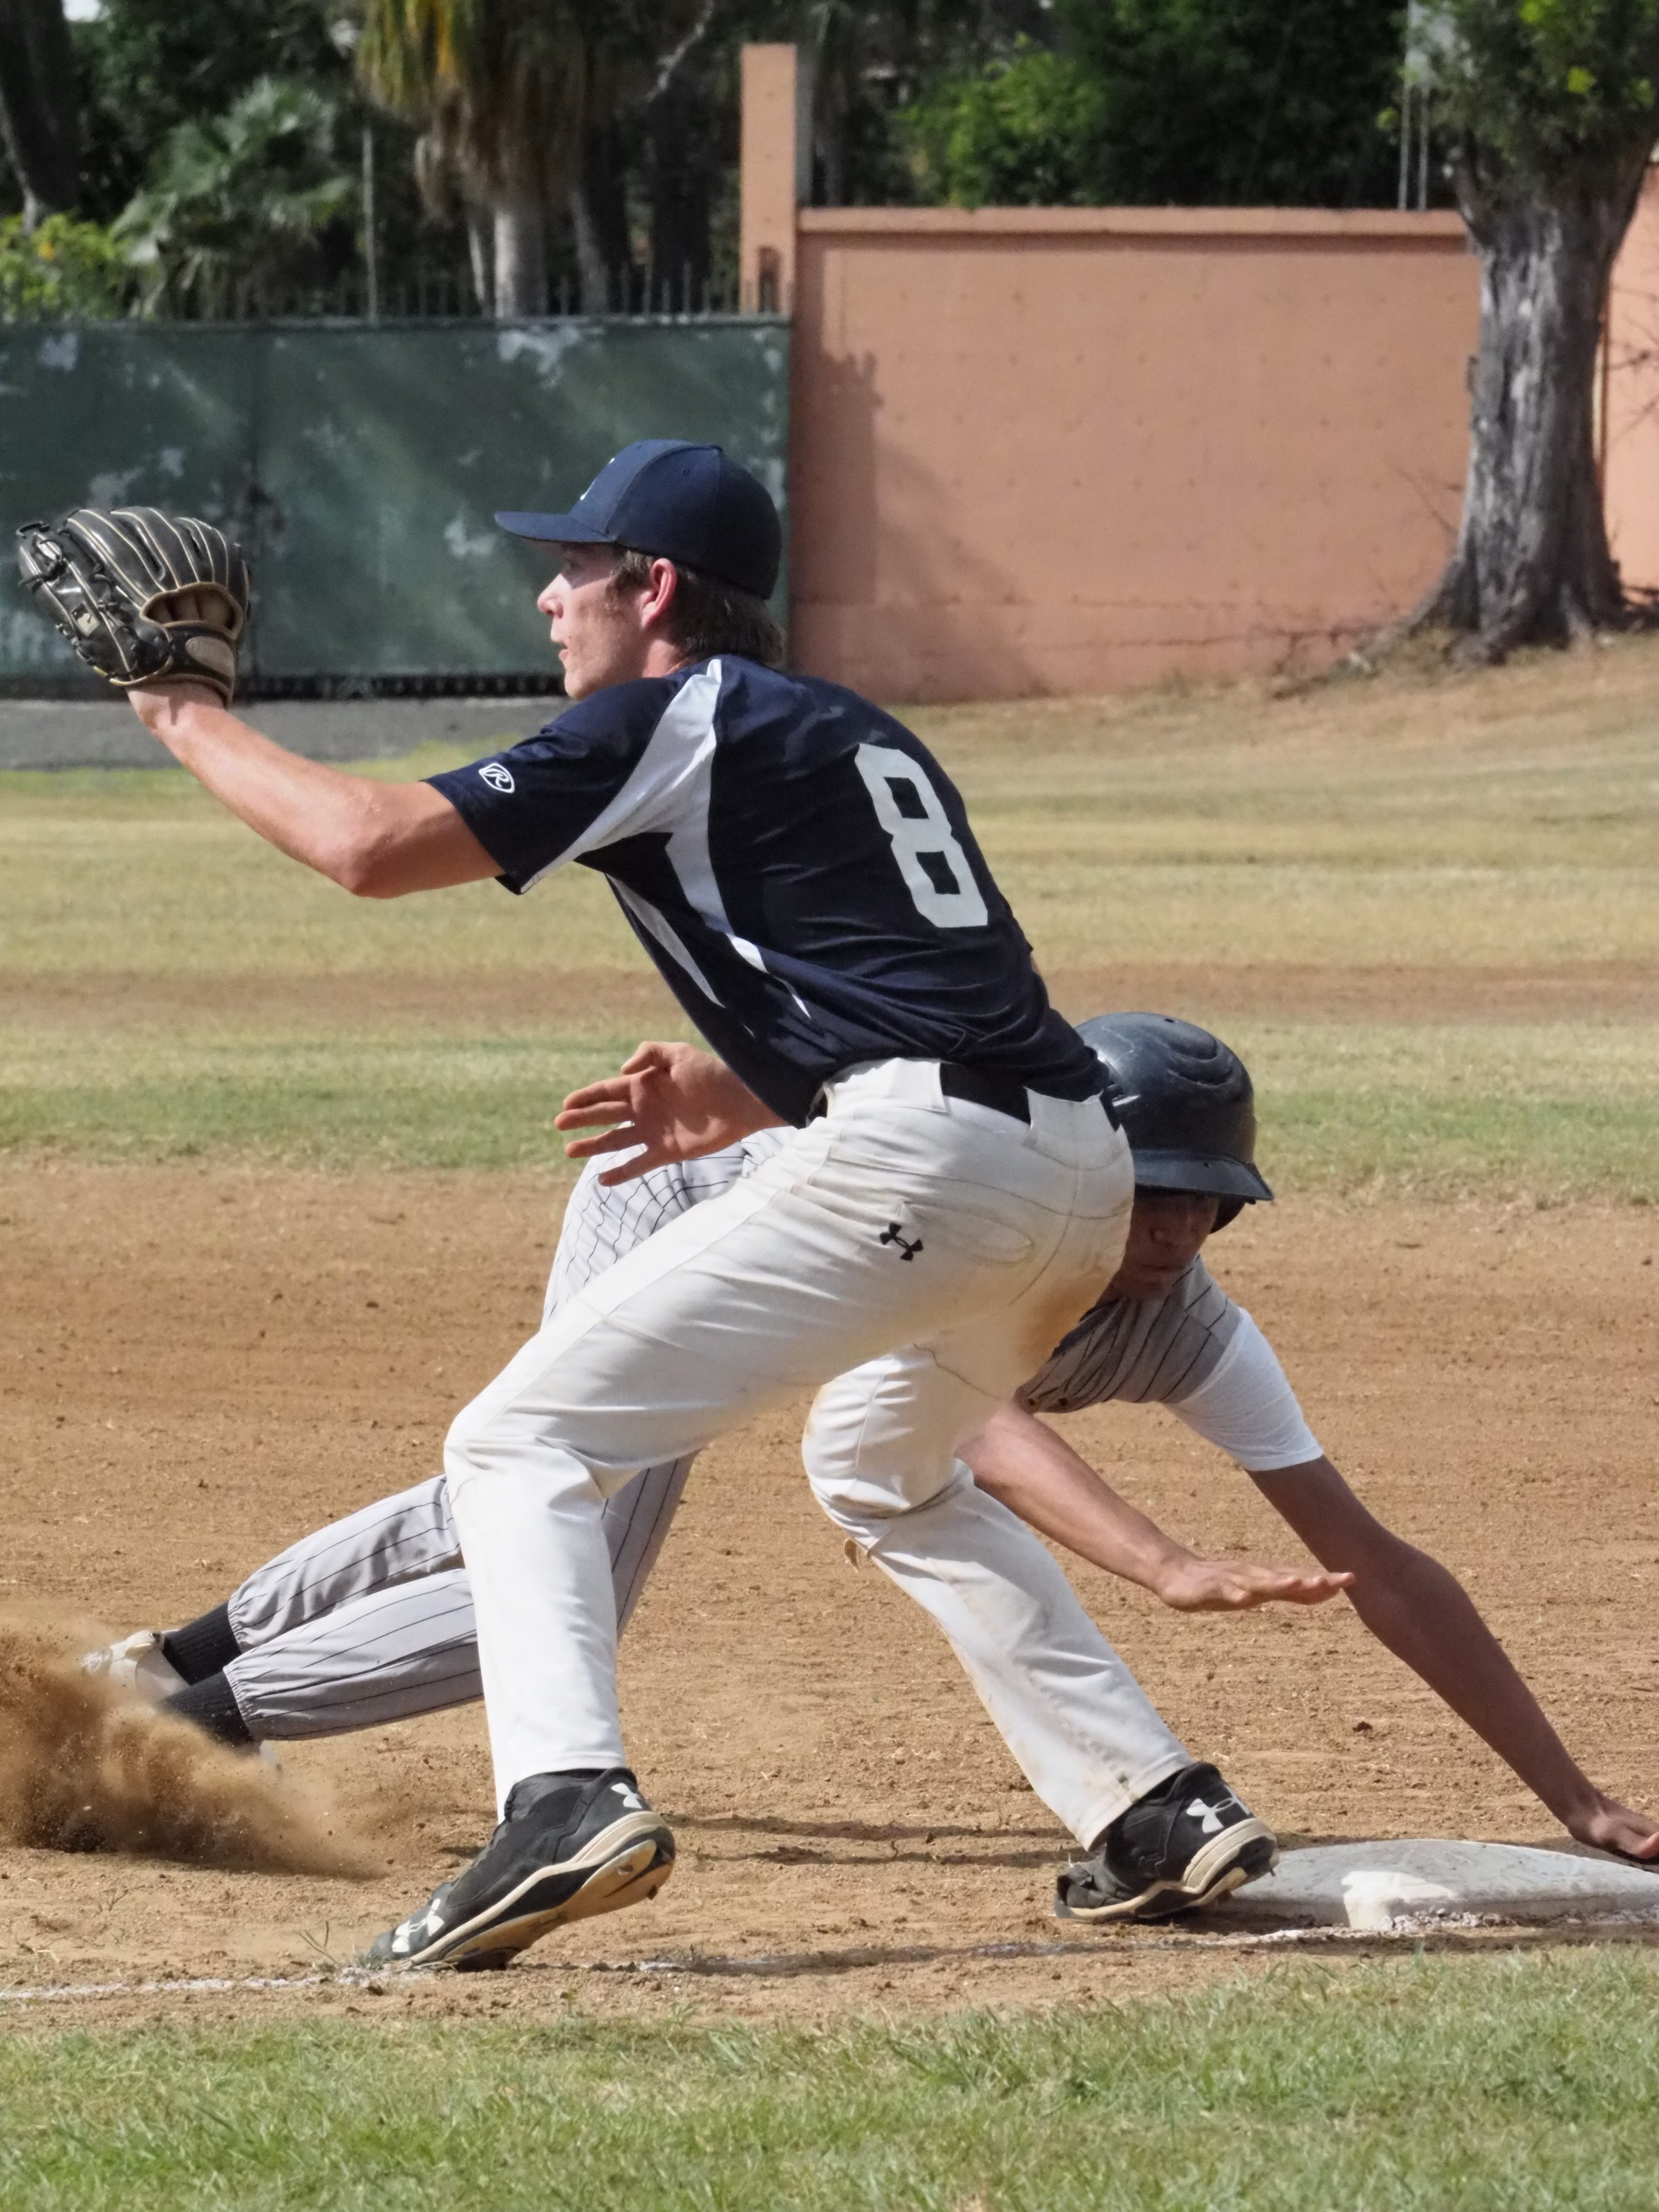 The Hawks rush back to first after attempting to steal for second base.jpg